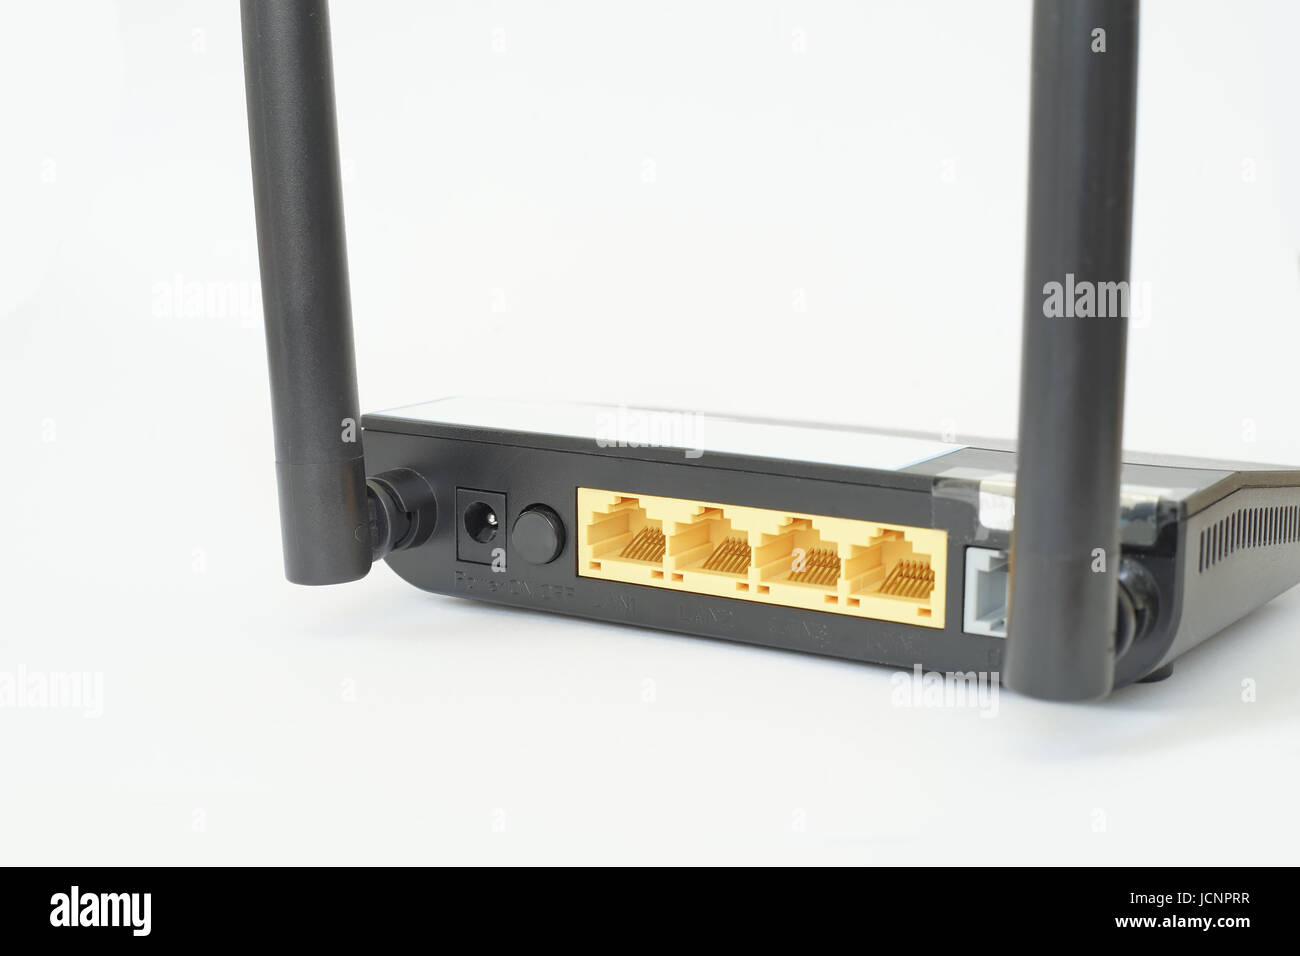 LAN and Wireless ADSL Modem Router in rear view Stock Photo - Alamy